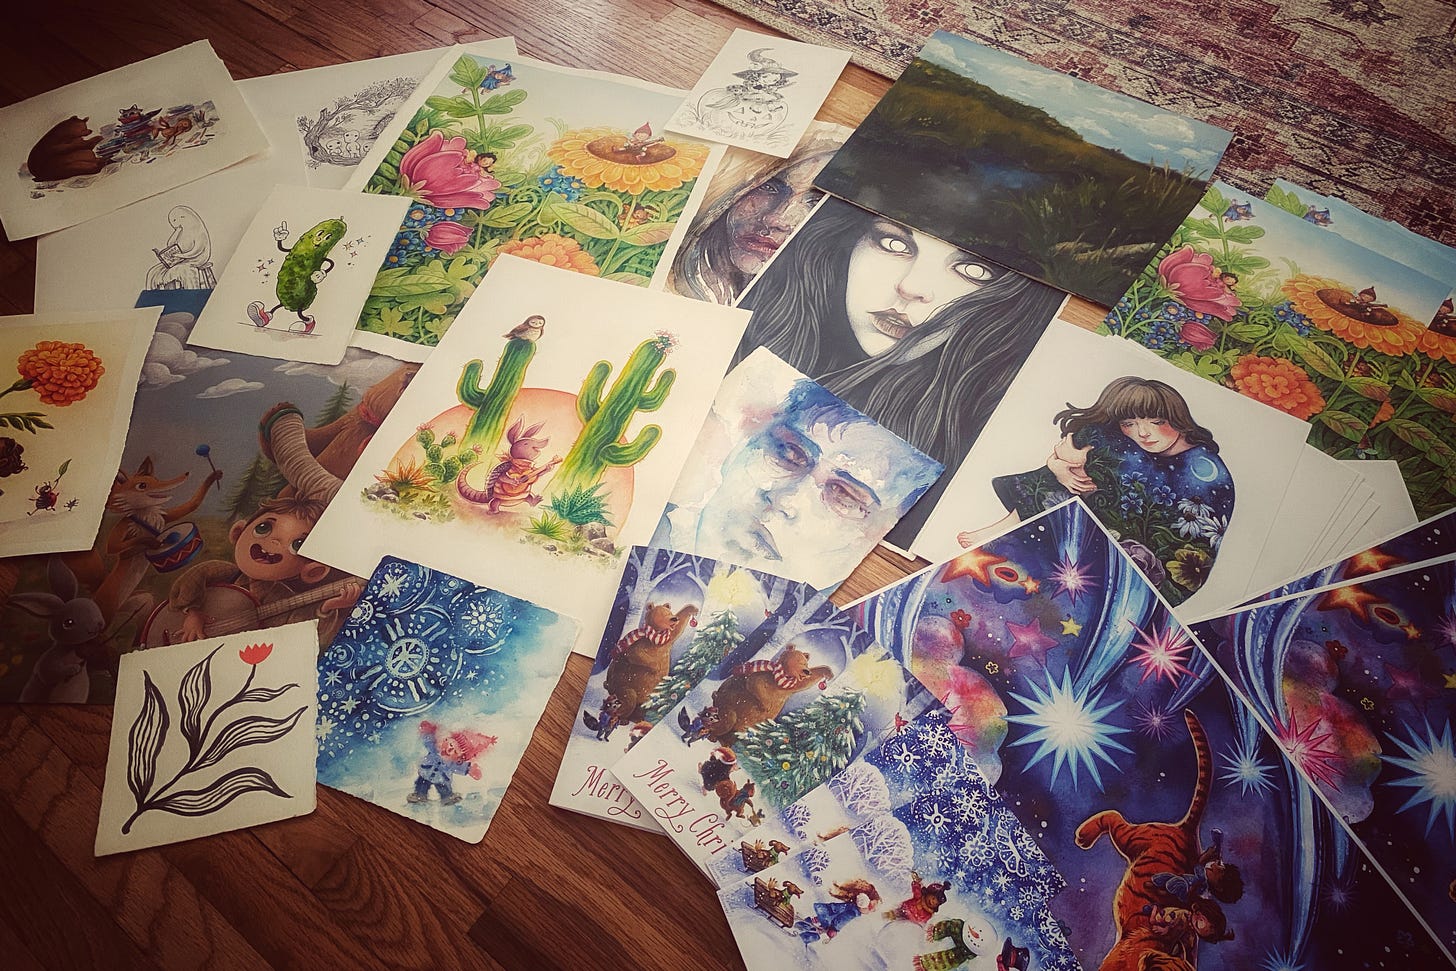 Photo of a variety of prints and original artwork, including children's illustrations and portraits.